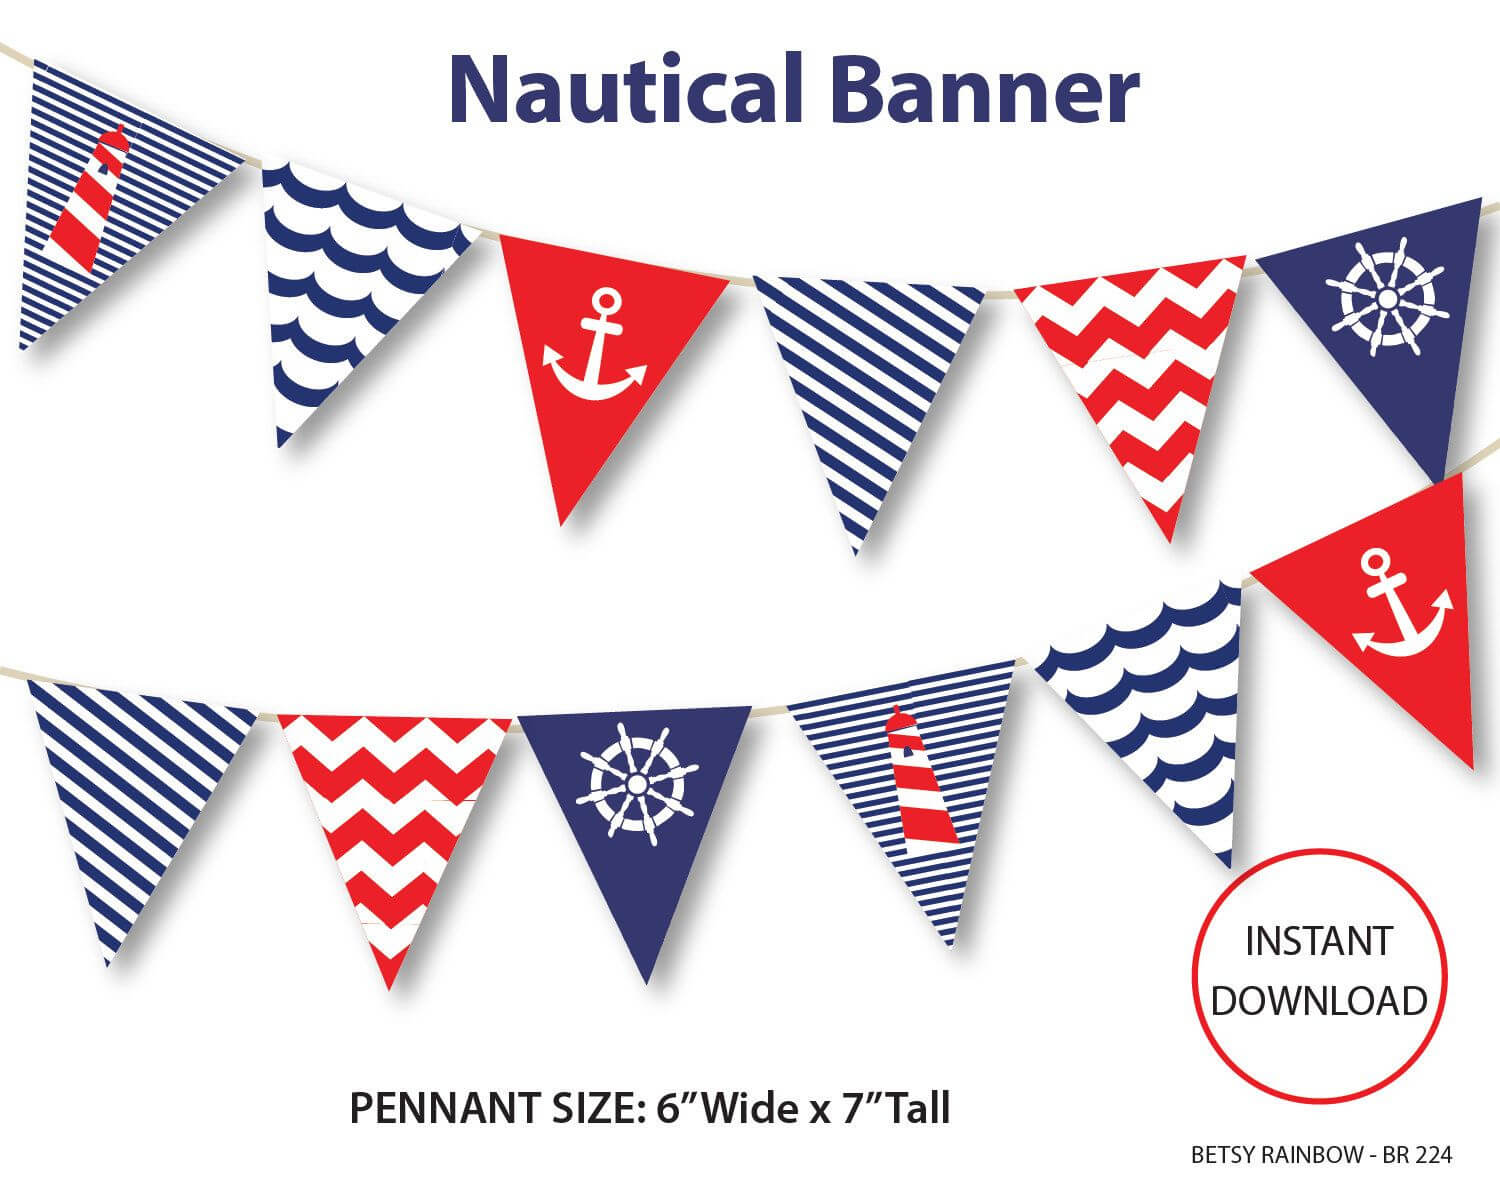 Nautical Banner, Printable Banner, Nautical, Diy Party, Navy In Nautical Banner Template